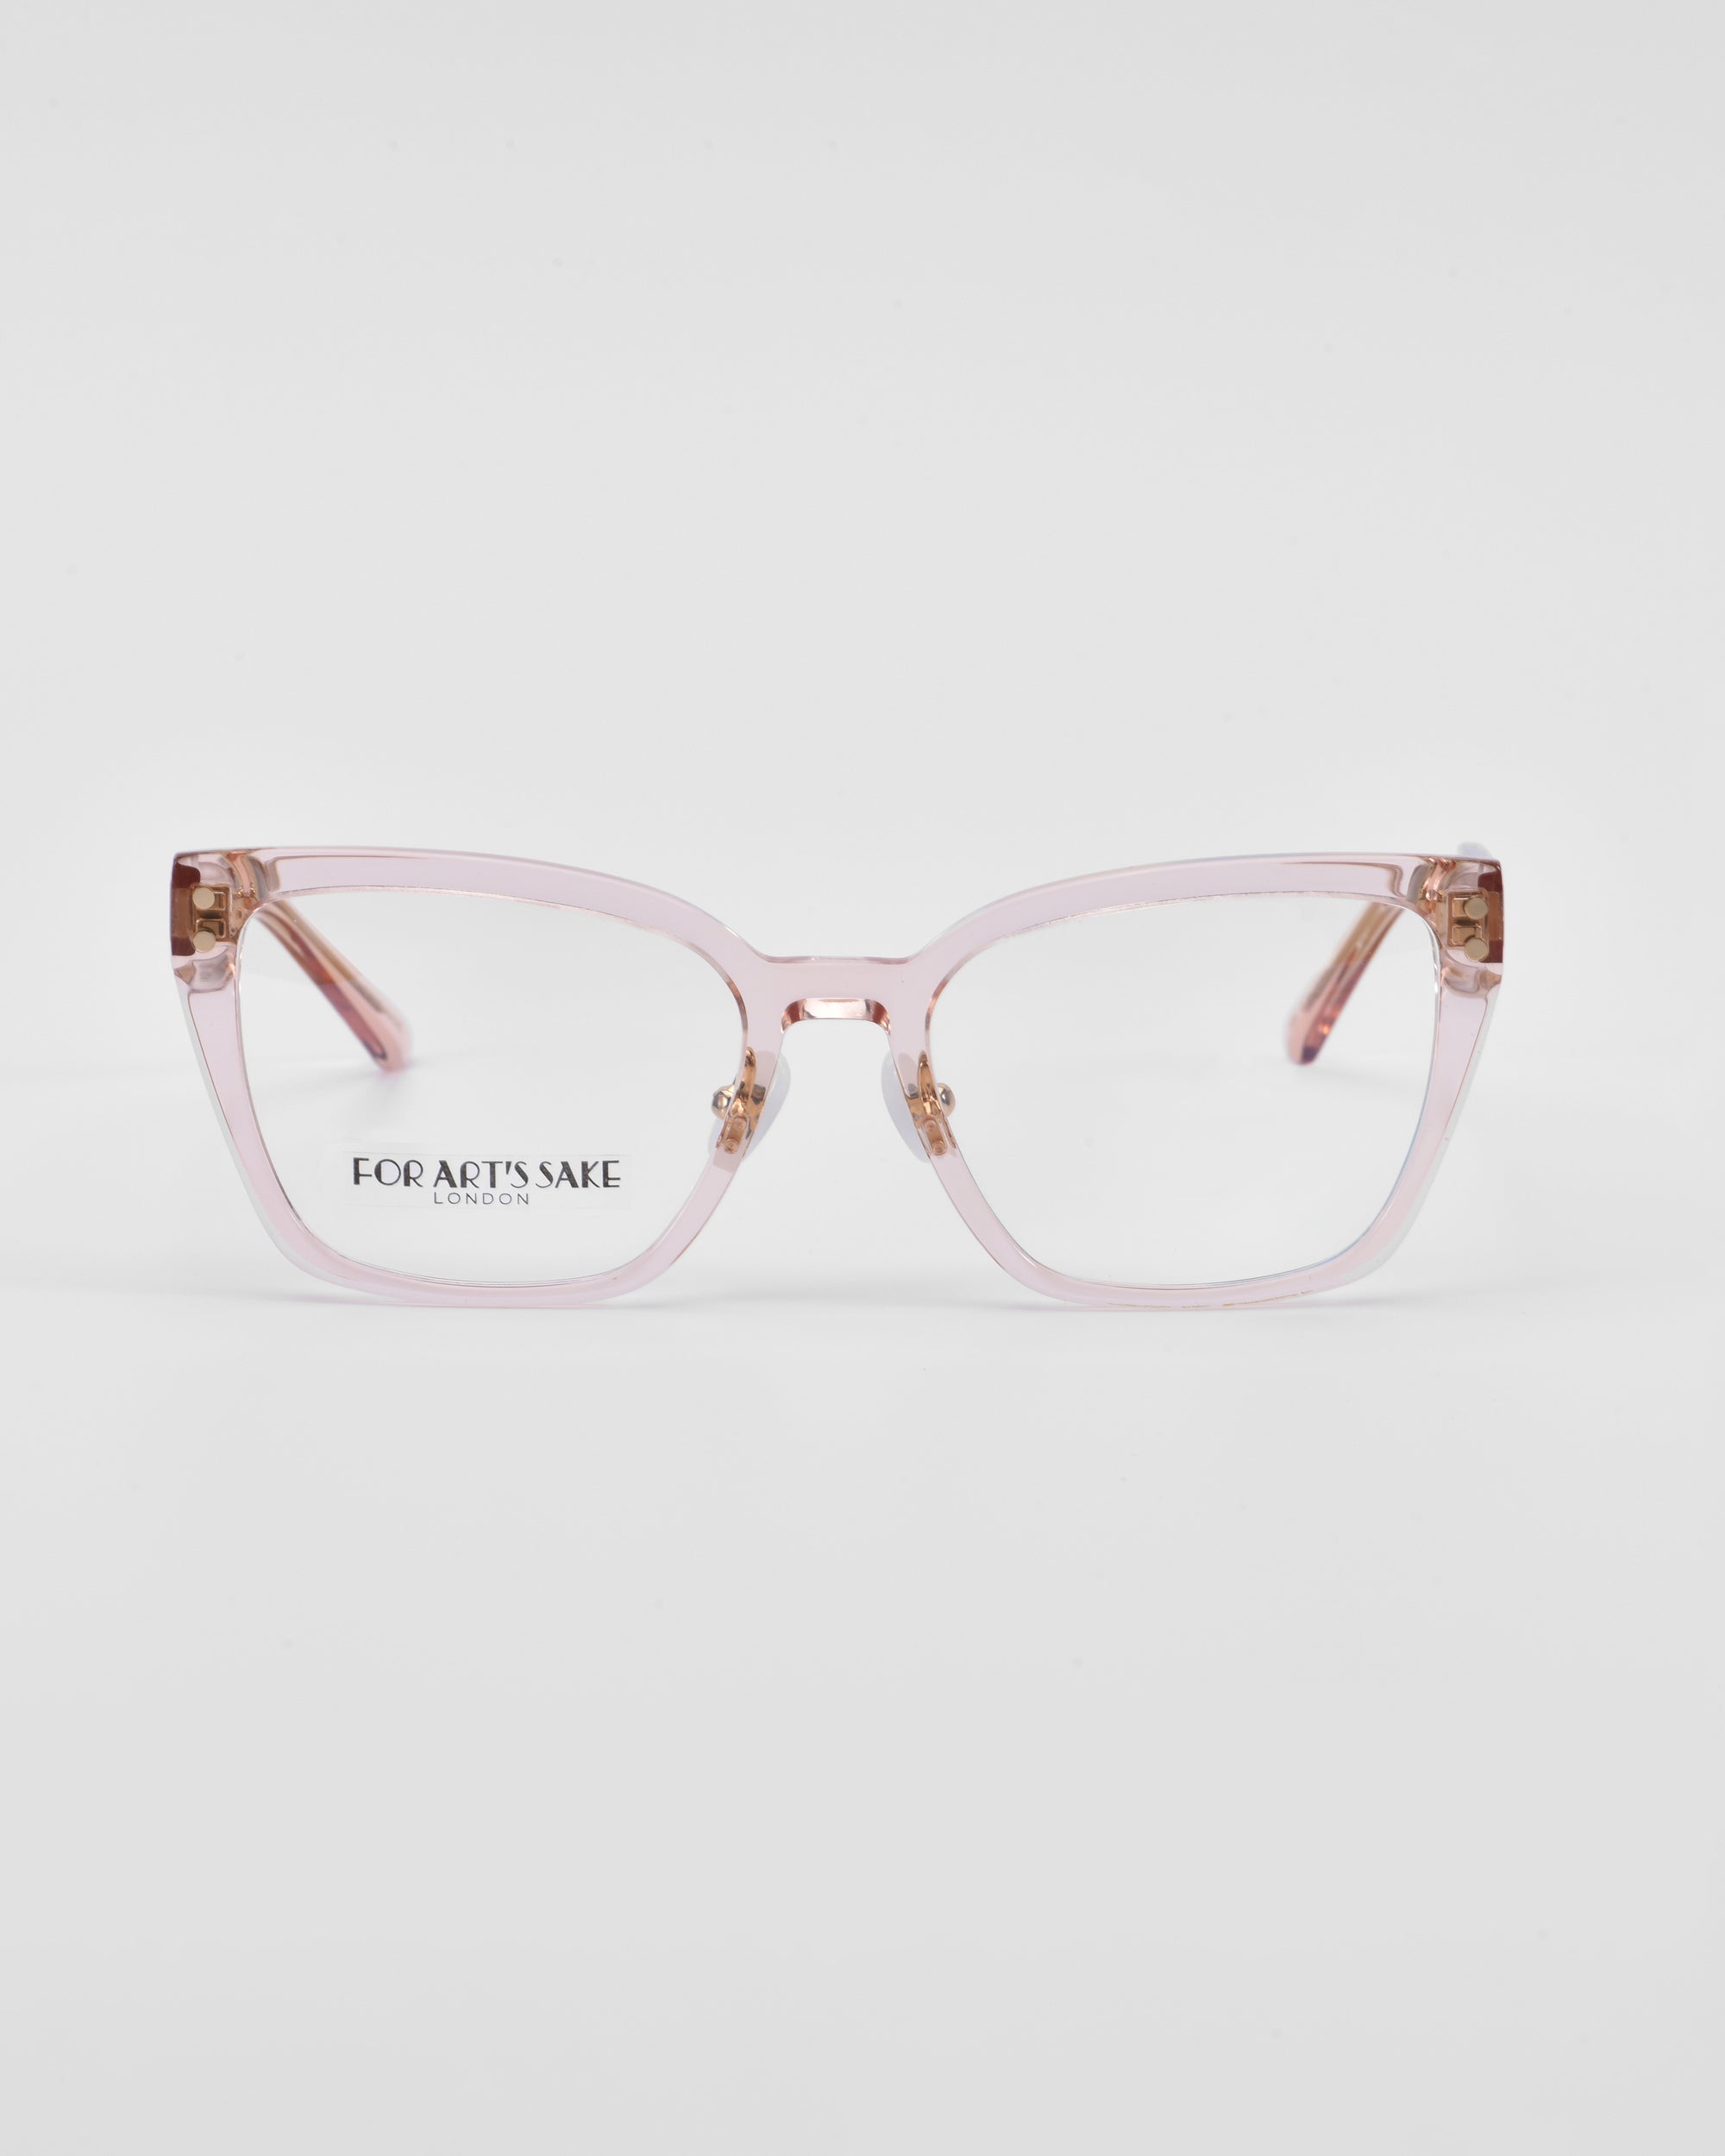 A pair of pink-colored Abbey cat-eye opticals with a transparent frame. The brand name &quot;For Art&#39;s Sake®&quot; is visible on the left lens. The background is plain white.